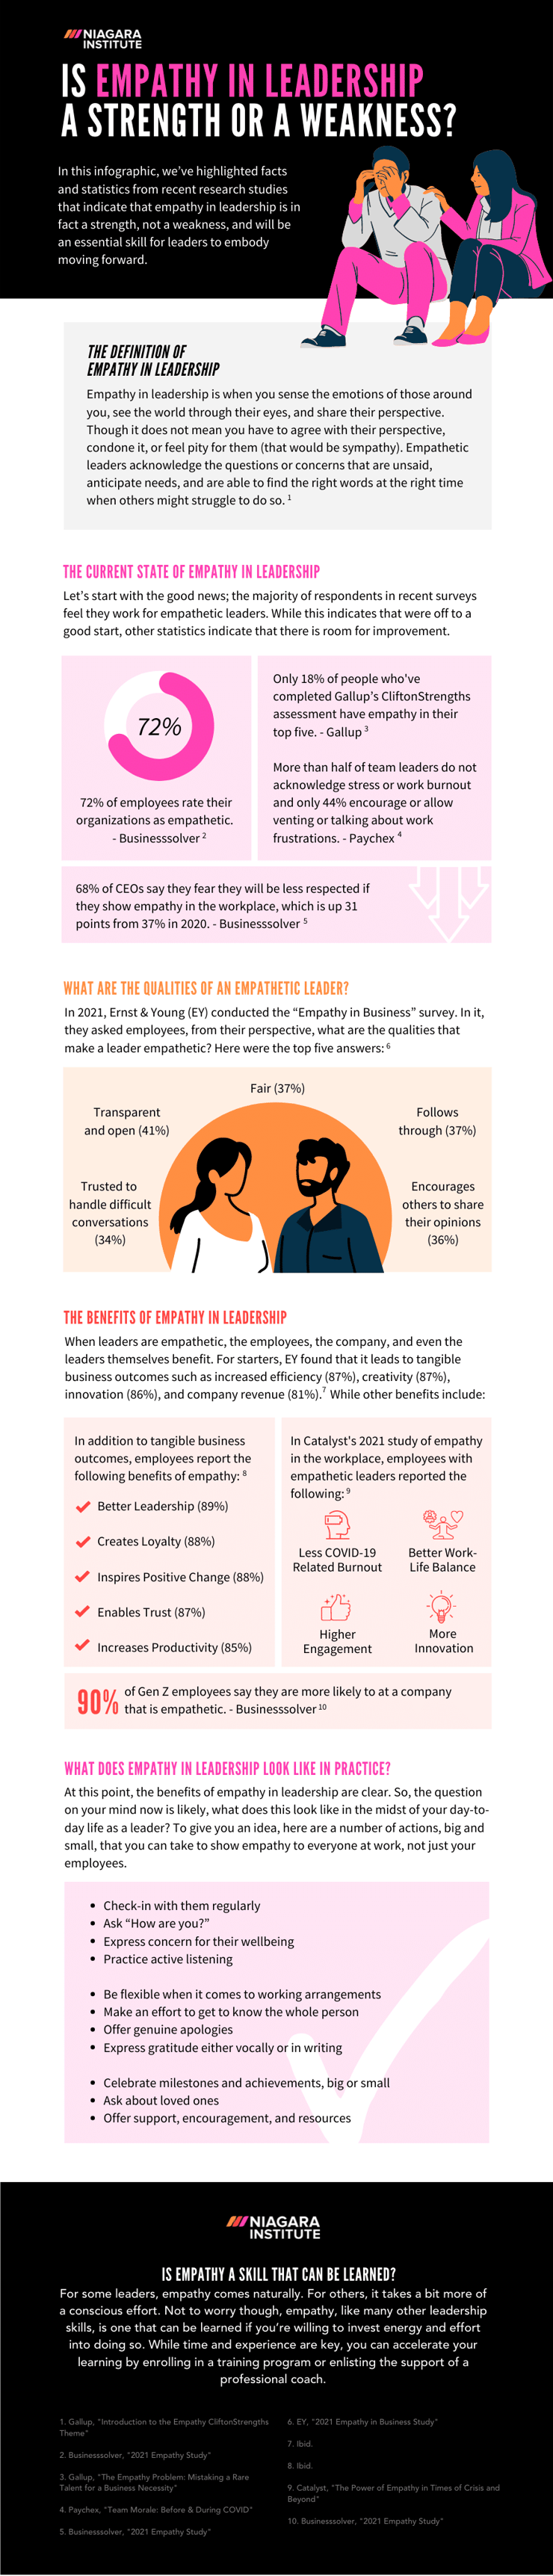 [Infographic] Is Empathy in Leadership  a Strength or a Weakness